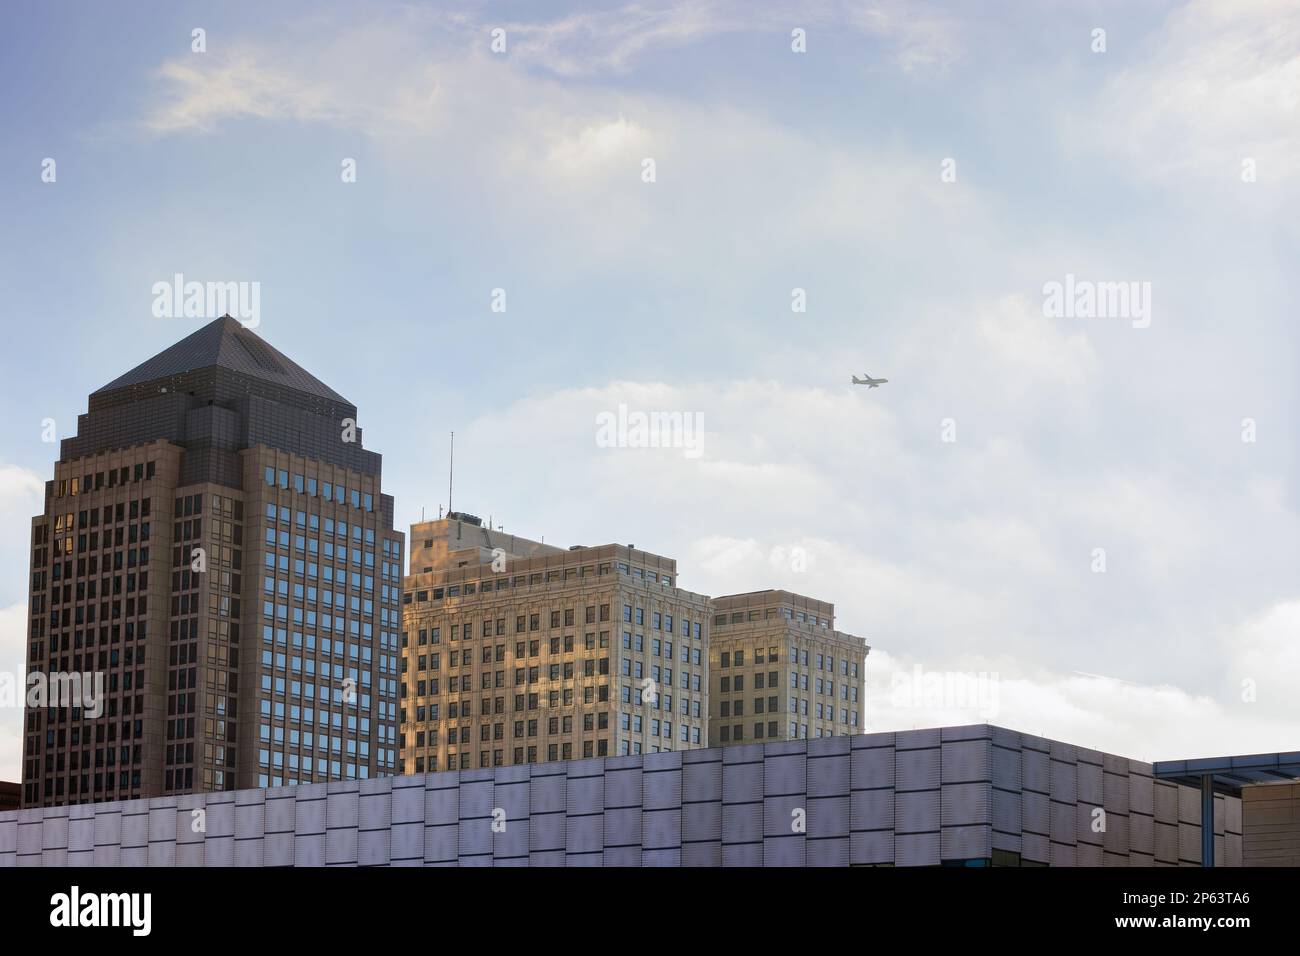 Tops of buildings under cloudy bright skies with a plane flying overhead in downtown Cleveland, Ohio. Stock Photo